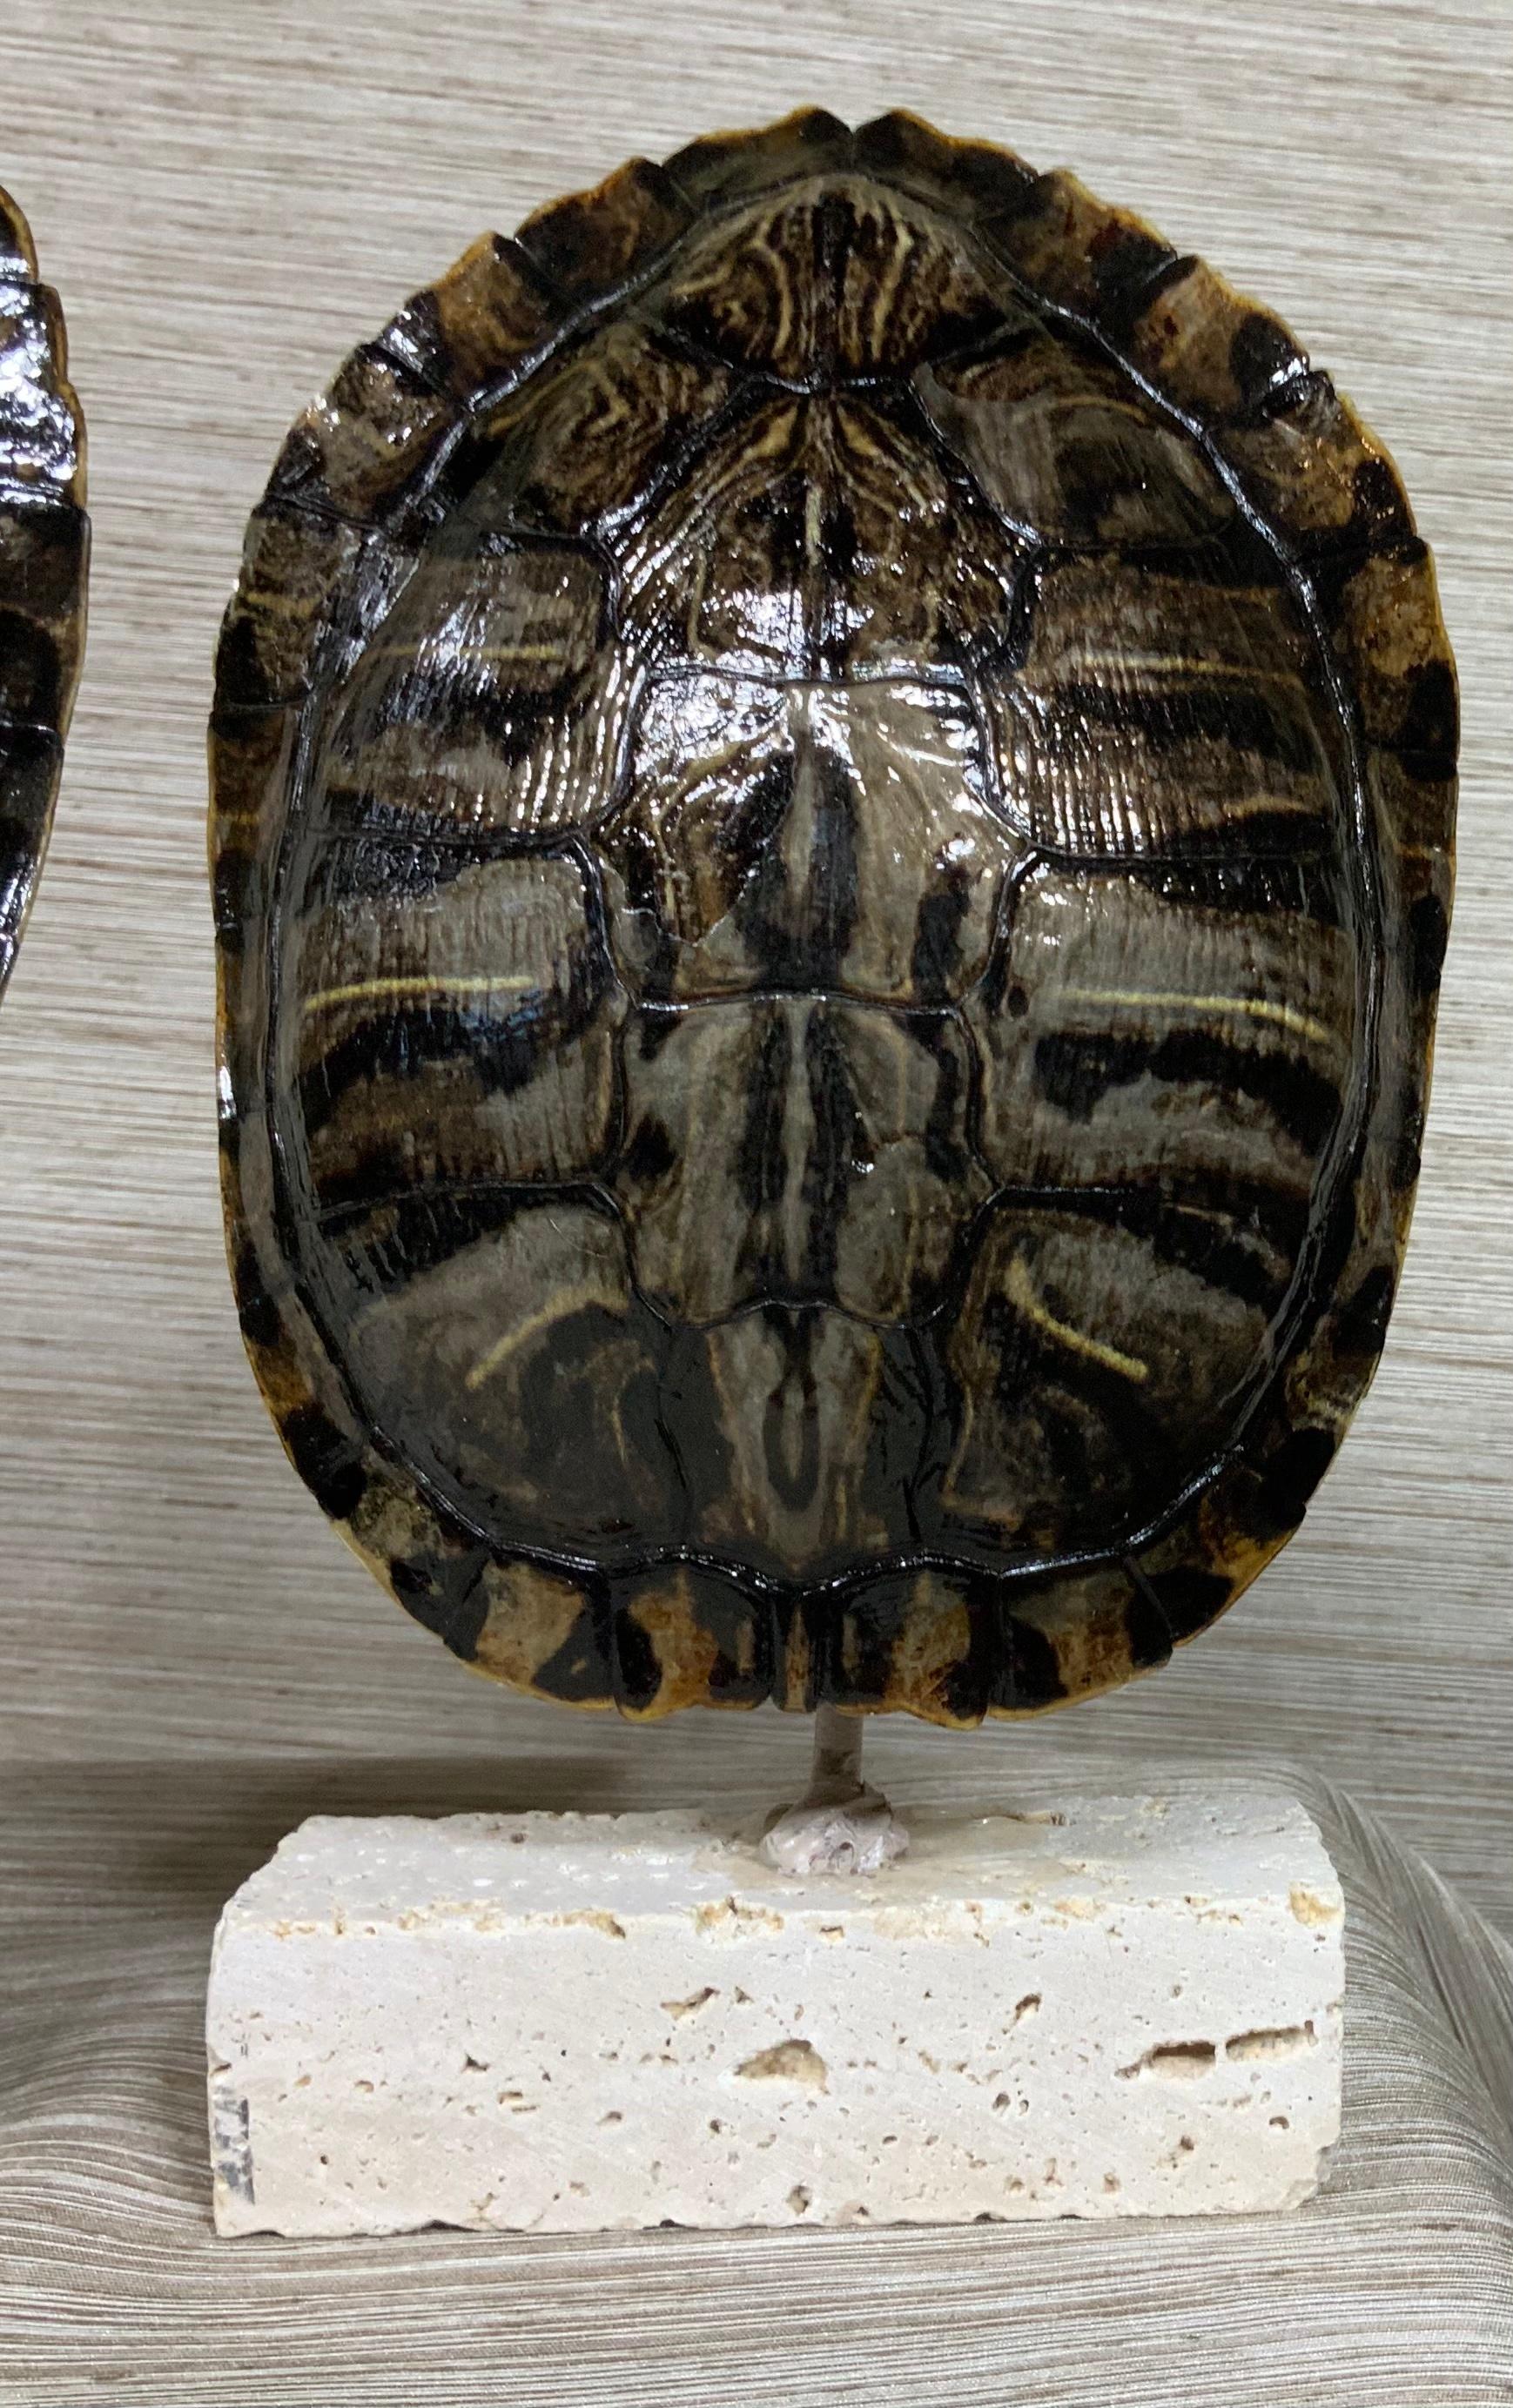 Decorative fresh water turtle shells professionally mounted on coral base, the shells are cleaned and seal with clear protective satin finish.
Beautiful natural piece of art for display.
Shells size only without the base: 6” x 4”.5. 6” x 4”.5.